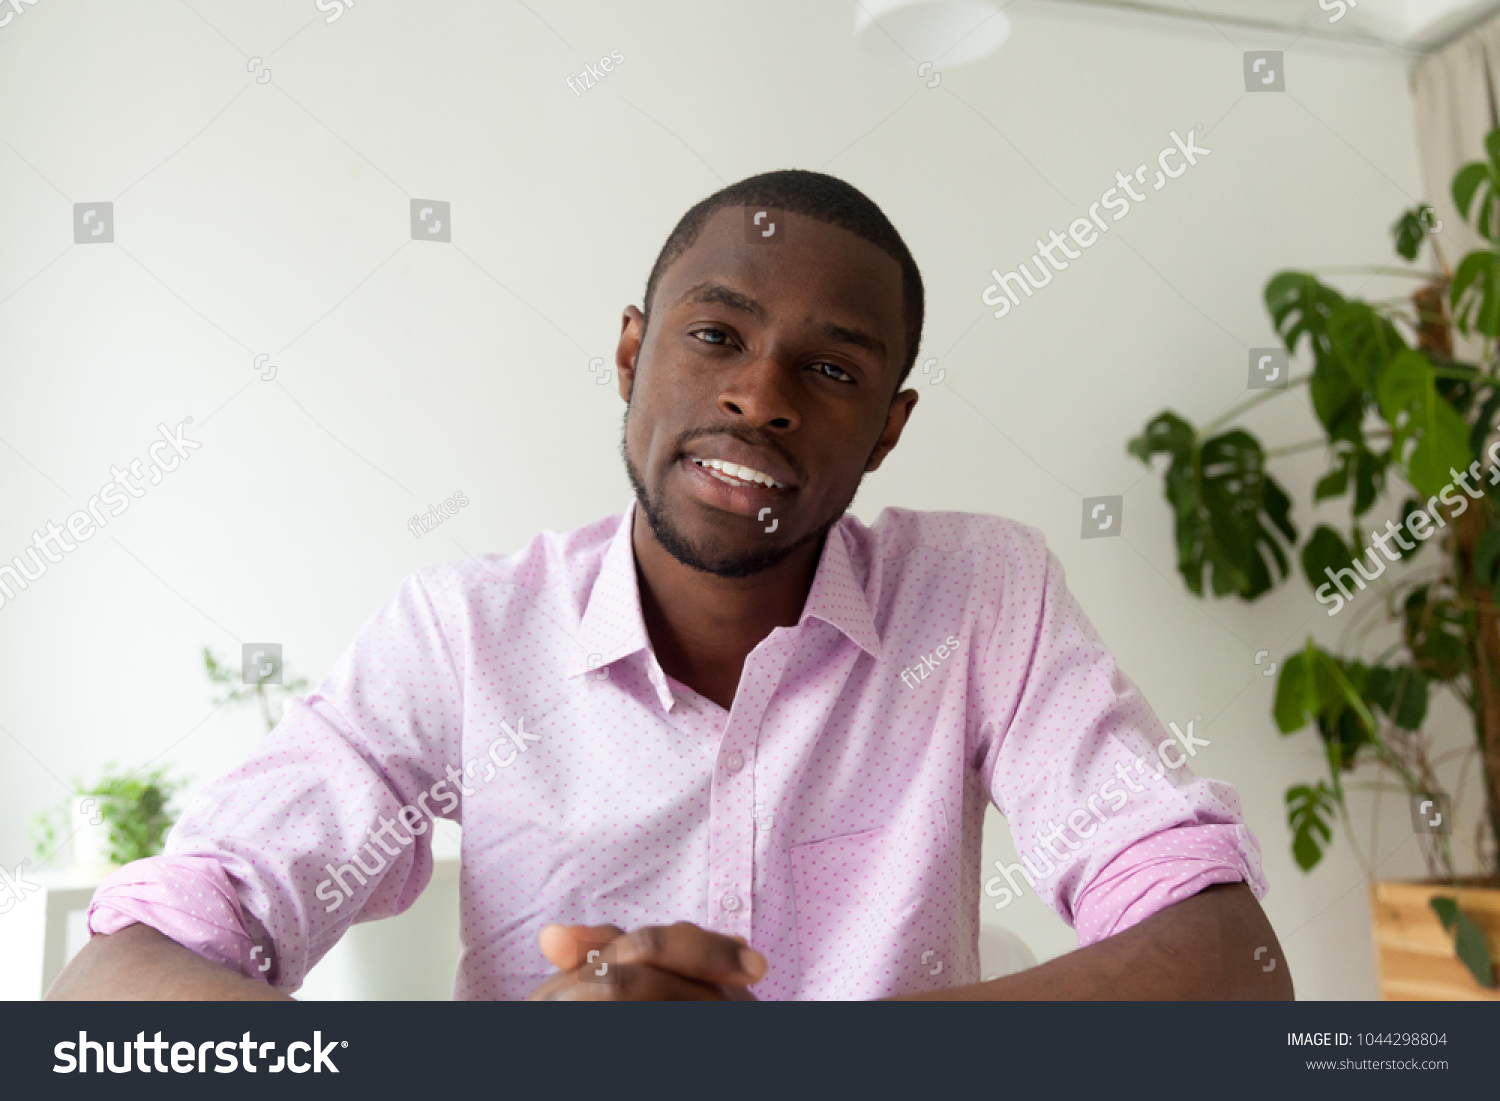 African-american man talking looking at camera, black man vacancy candidate making video call for distance job interview, dark-skinned vlogger recording videoblog, view from webcam, headshot portrait #1044298804